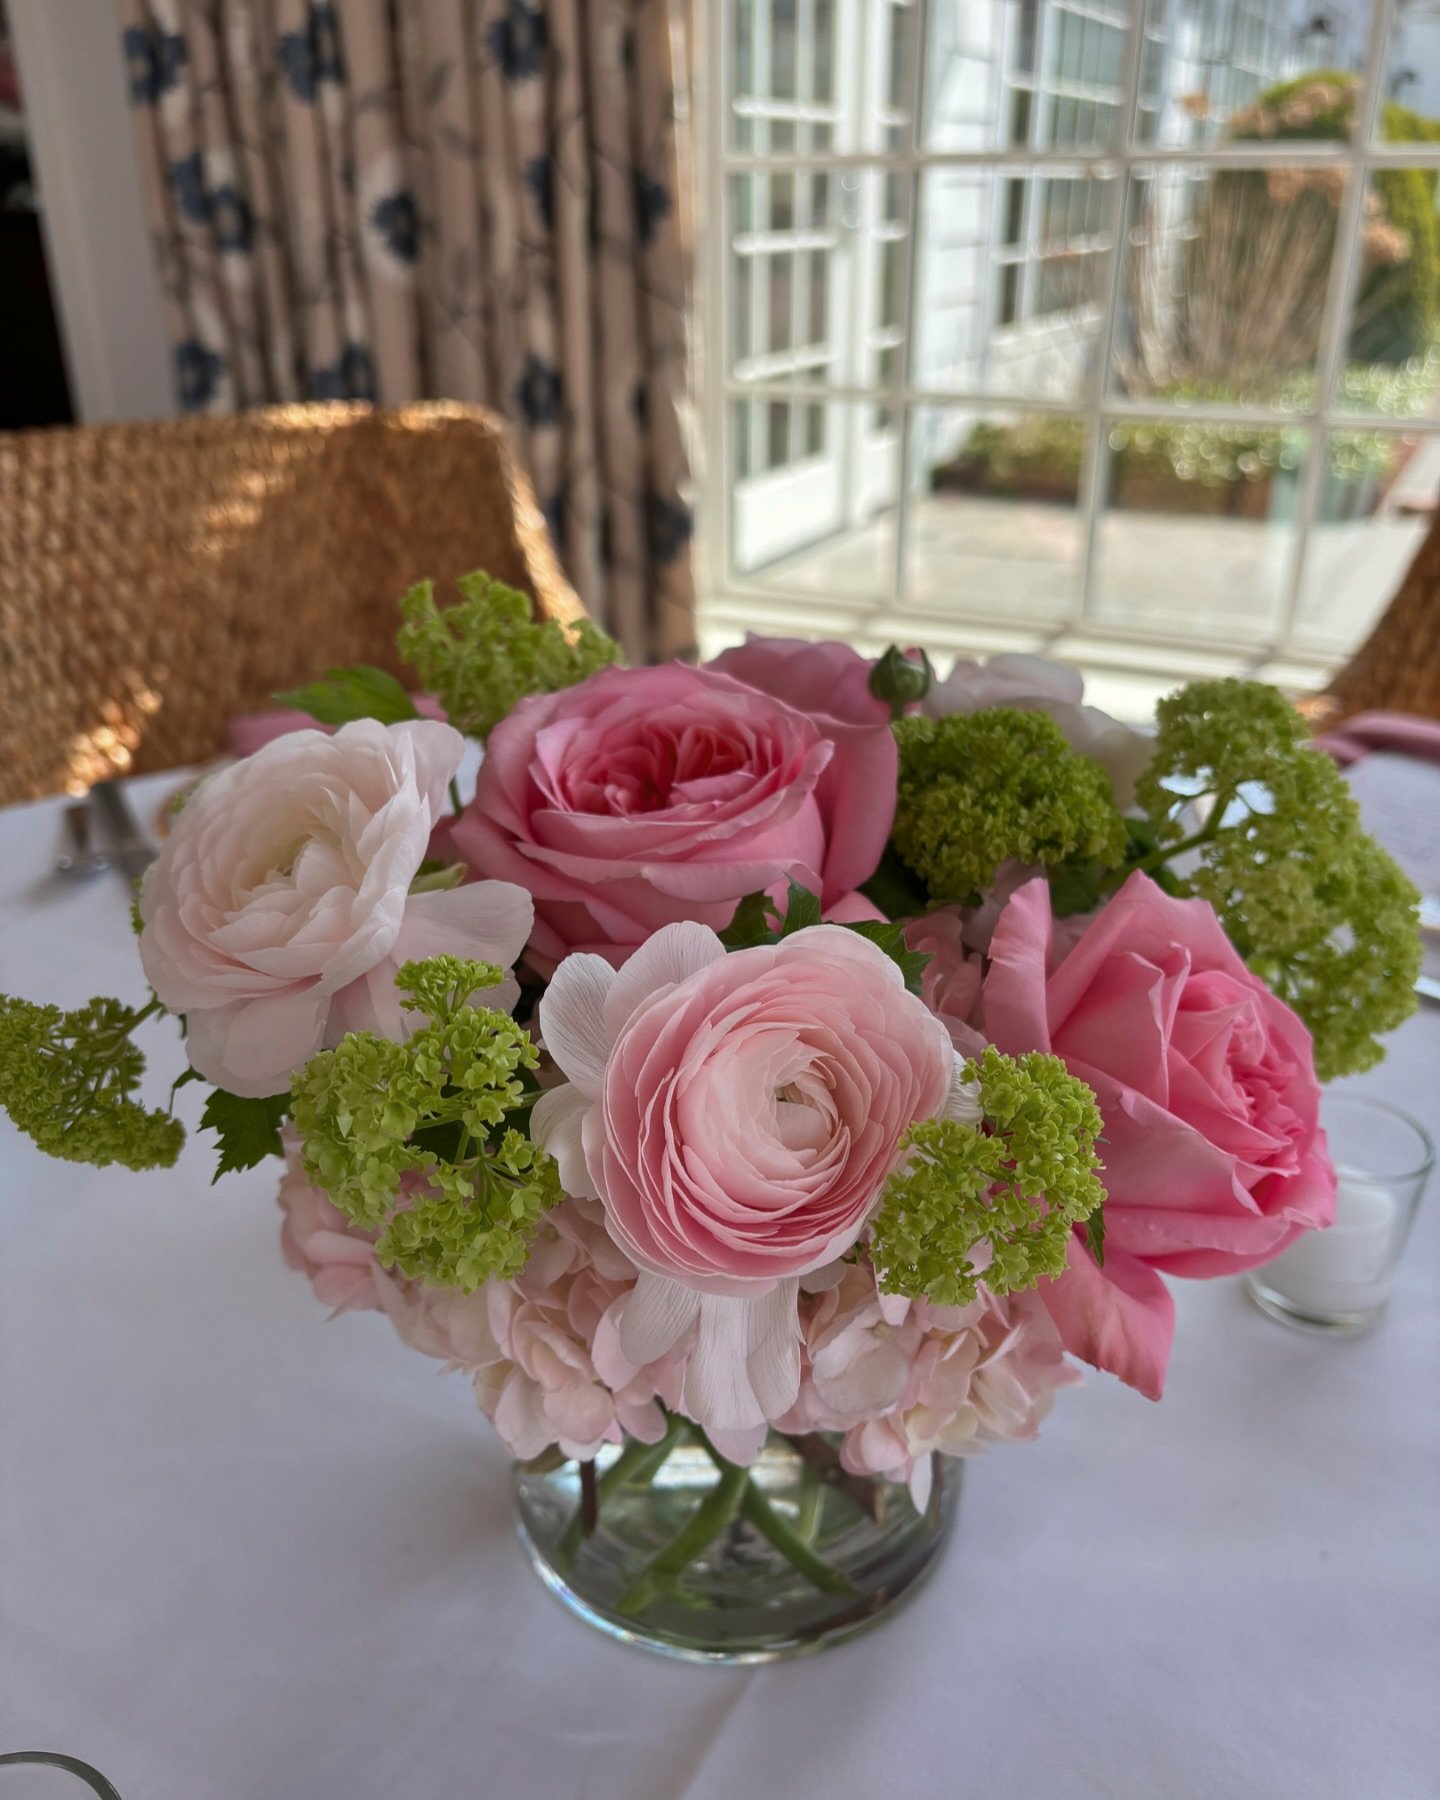 Today&rsquo;s sweet pink centerpieces for a bridal shower at @westmorelandcc . 💕

Whether you need 1 centerpiece, or 5 , or 25, FlowersFlowers is here for you! We design flowers for every occasion.